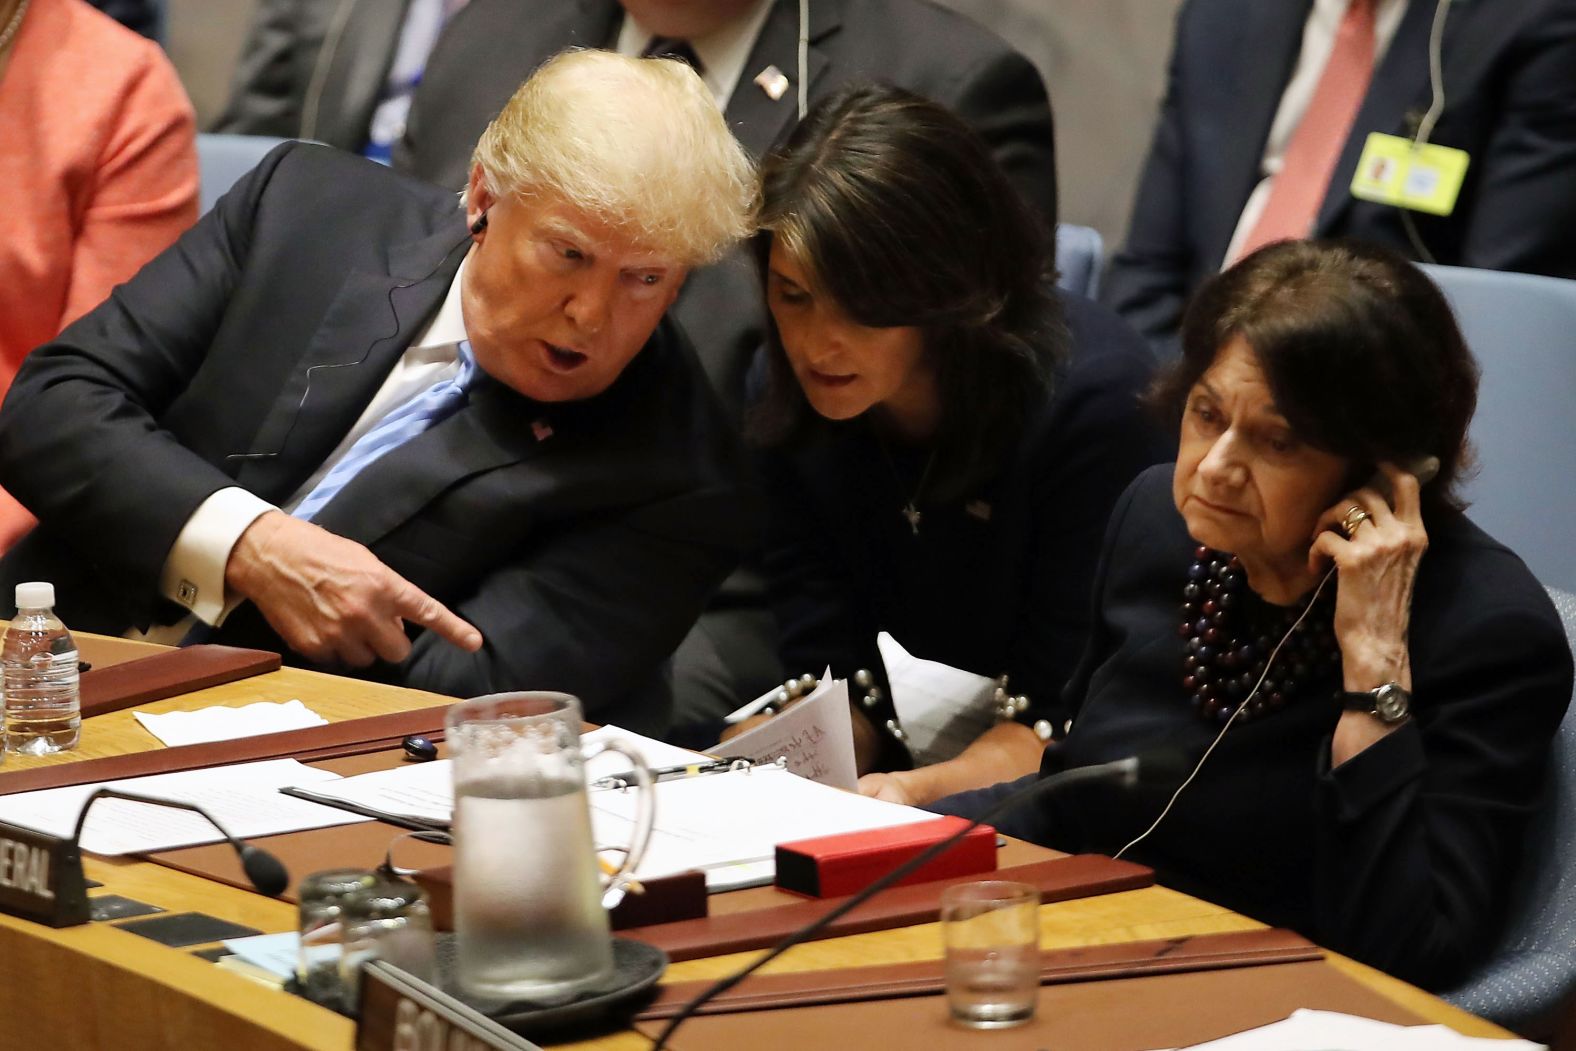 Trump speaks with Haley while chairing a UN Security Council meeting in September 2018.